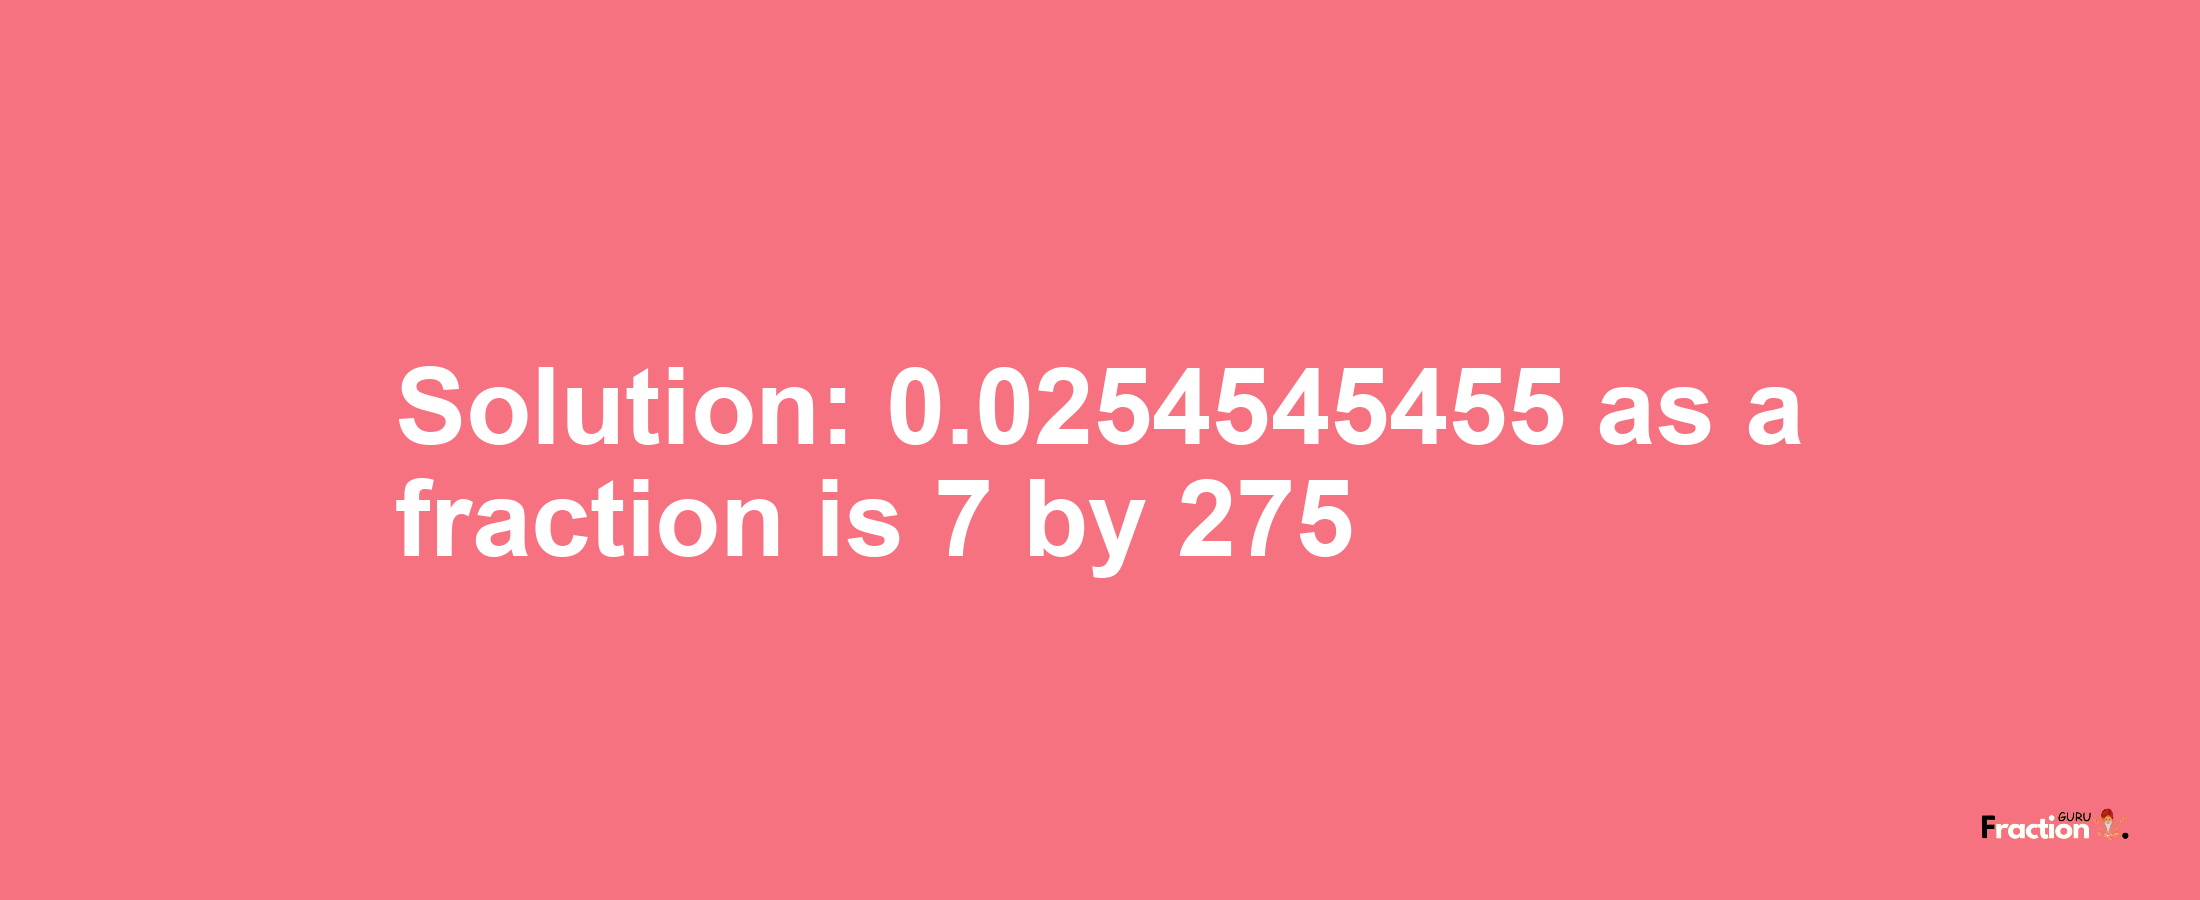 Solution:0.0254545455 as a fraction is 7/275